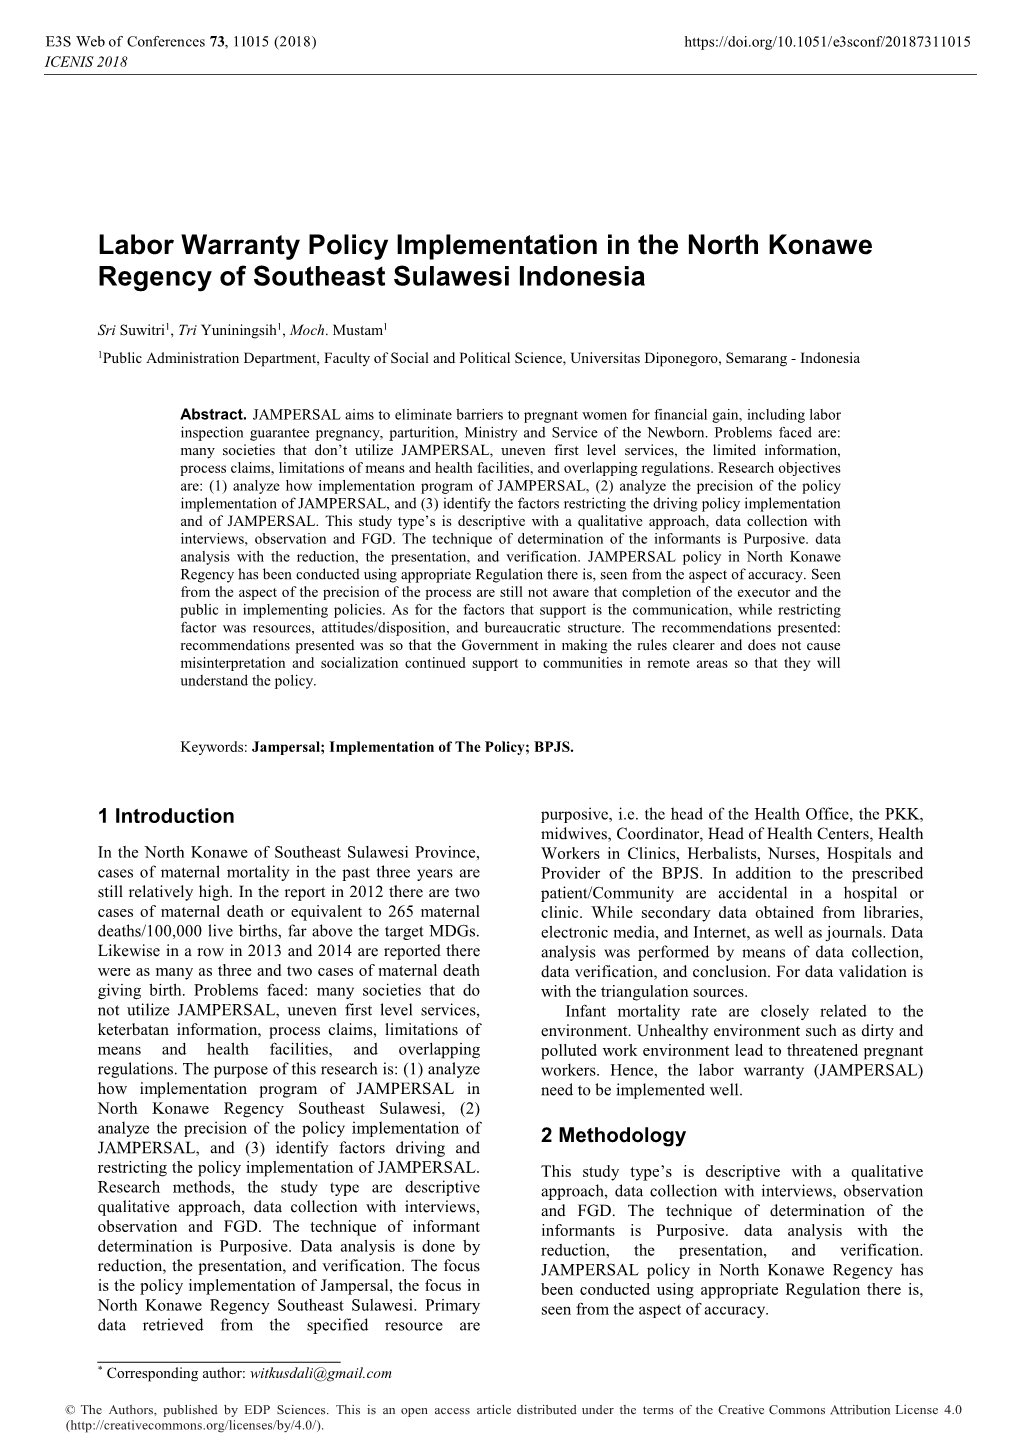 Labor Warranty Policy Implementation in the North Konawe Regency of Southeast Sulawesi Indonesia